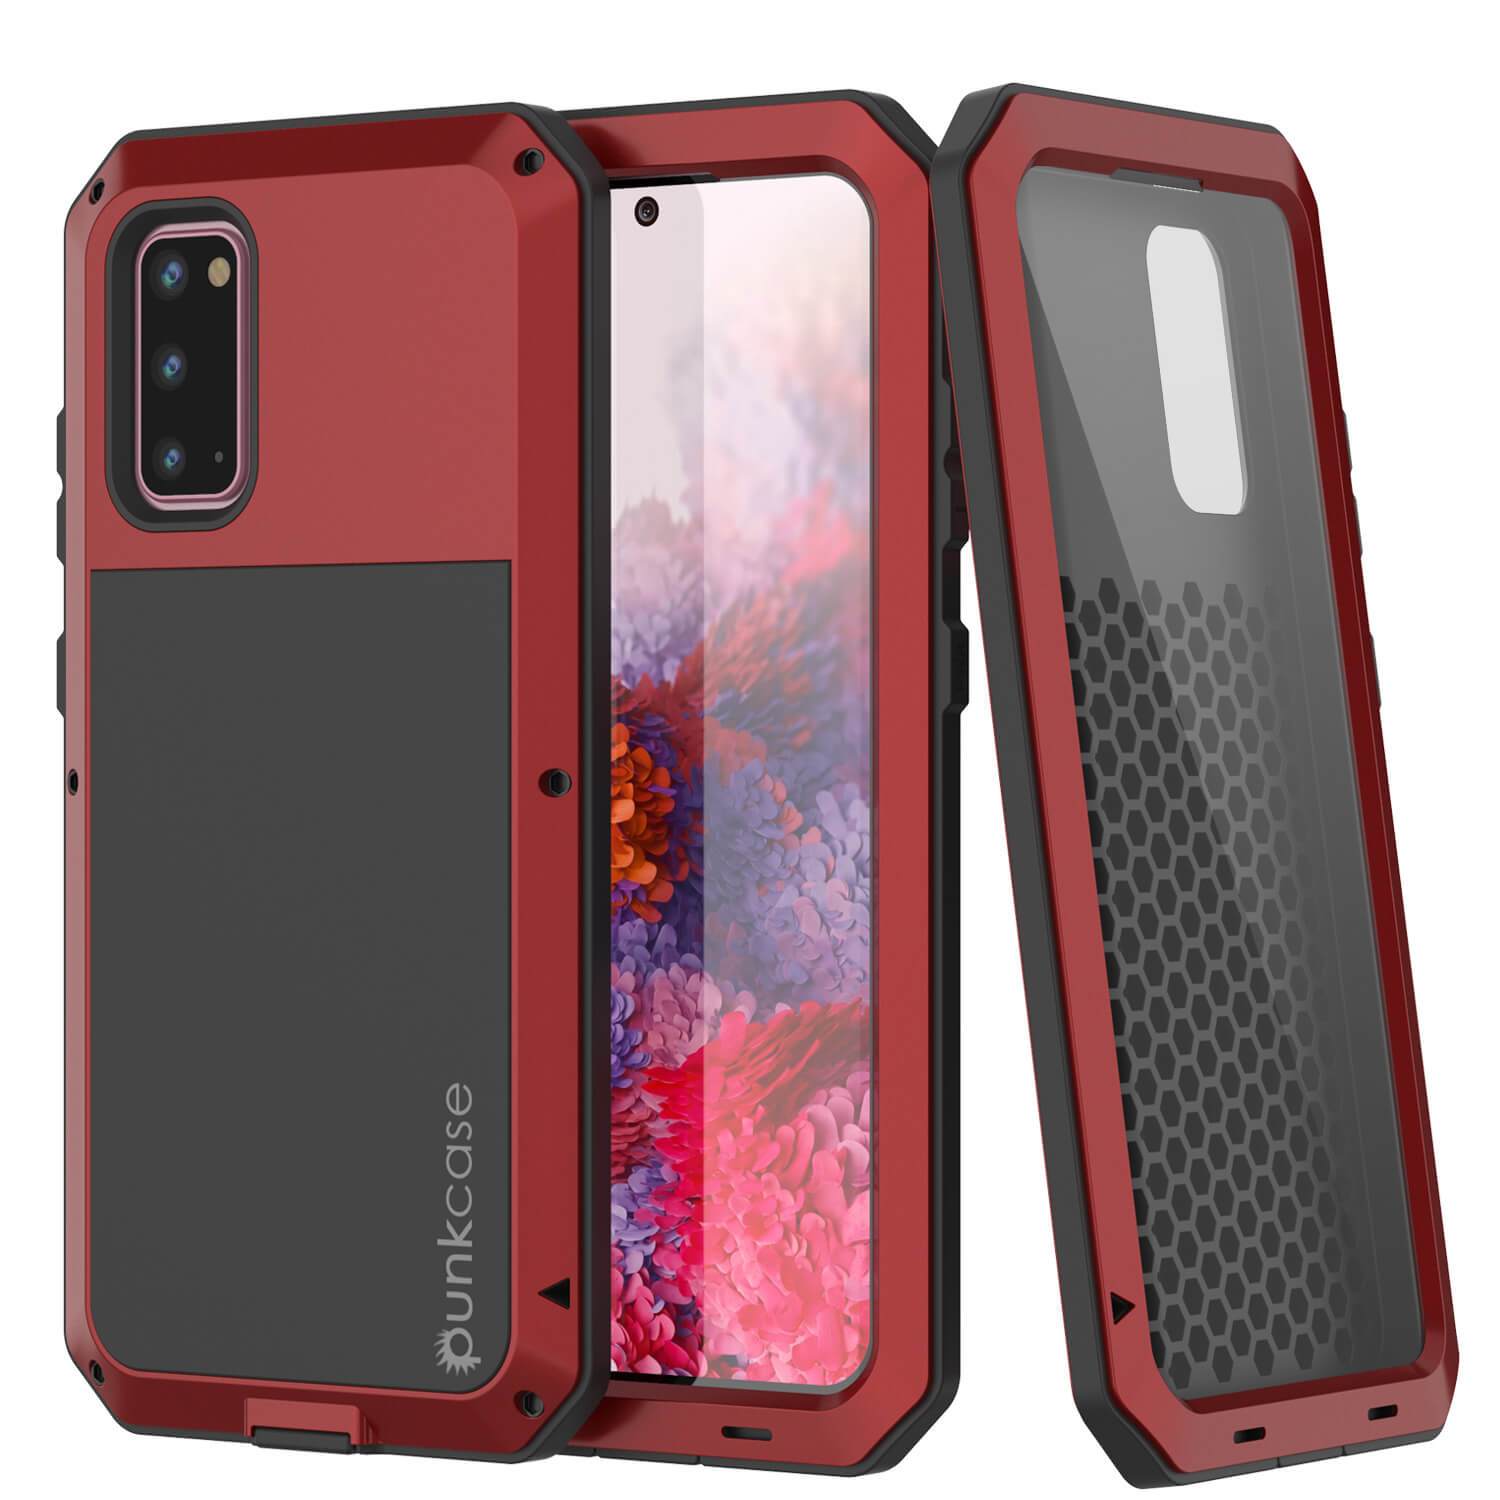 Galaxy s20 Metal Case, Heavy Duty Military Grade Rugged Armor Cover [Red]